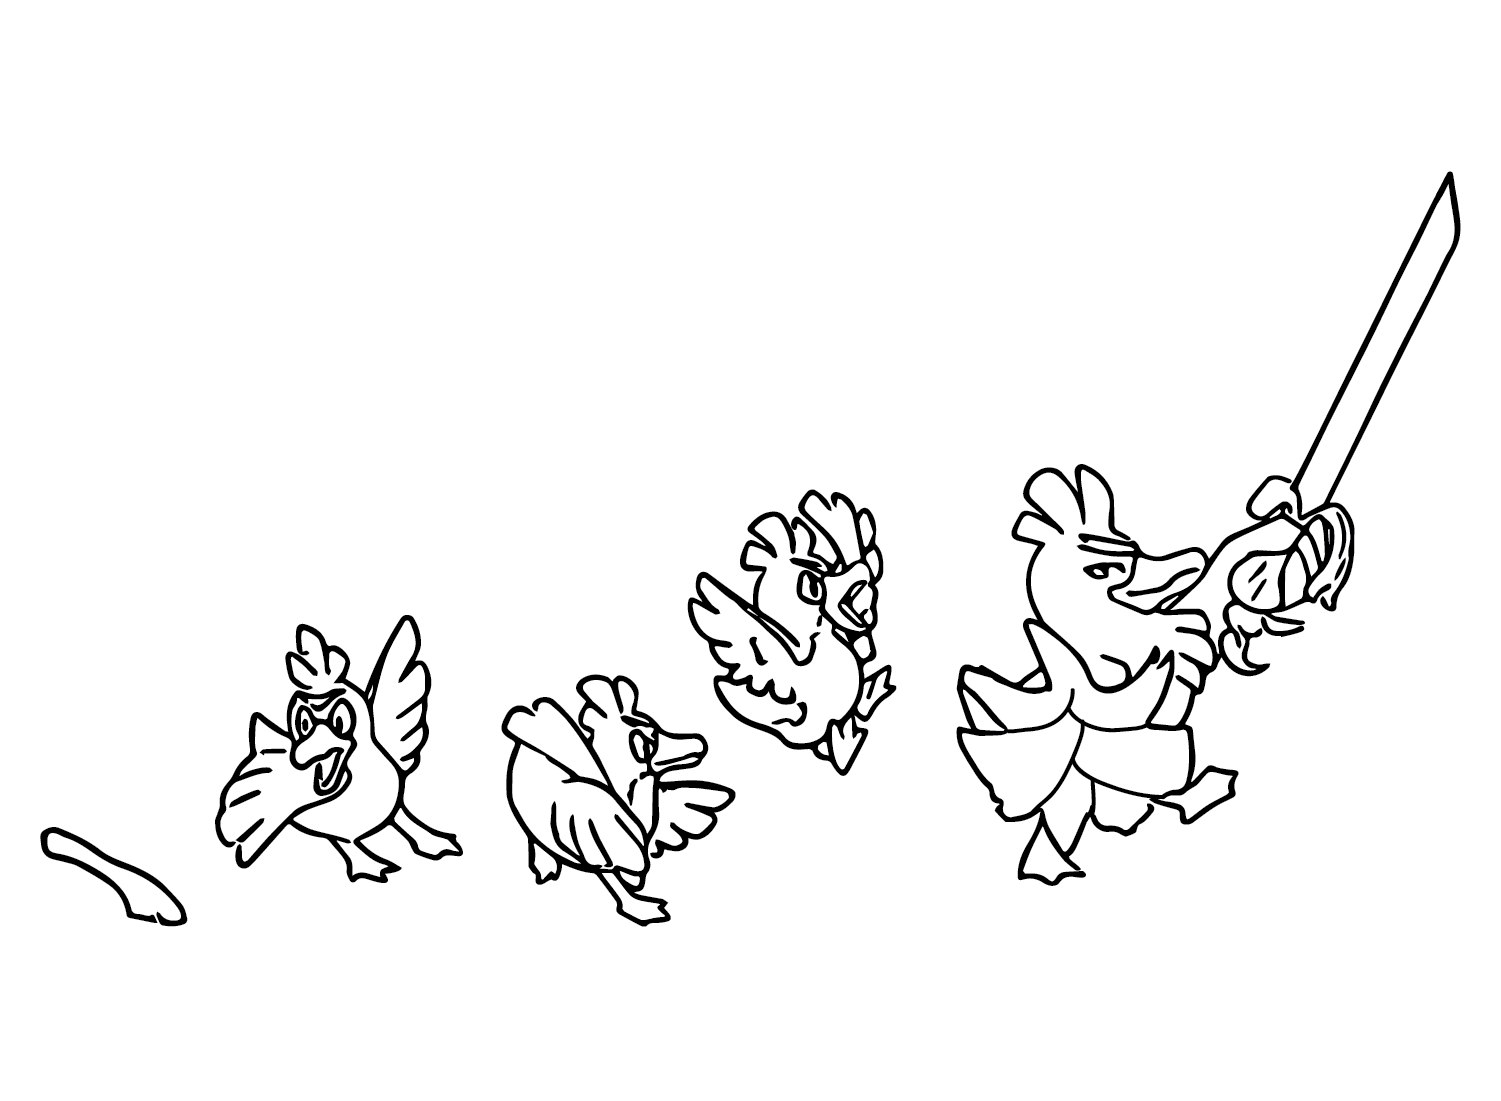 Evolve Sirfetchd Coloring Page